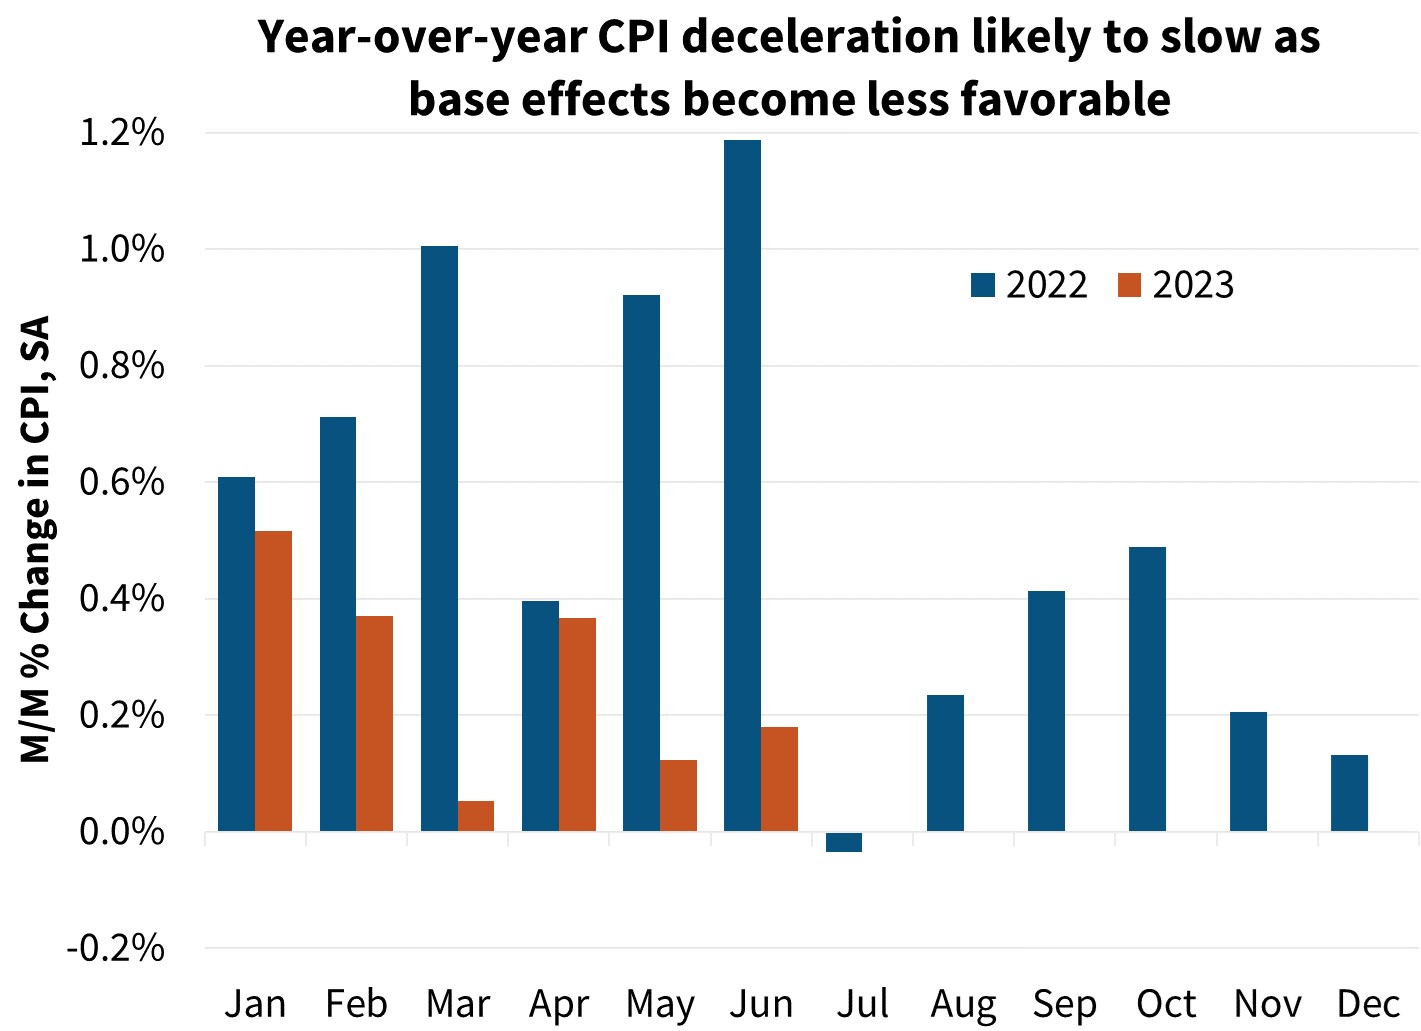 Year-over-year CPI deceleration likely to slow as base effects become less favorable